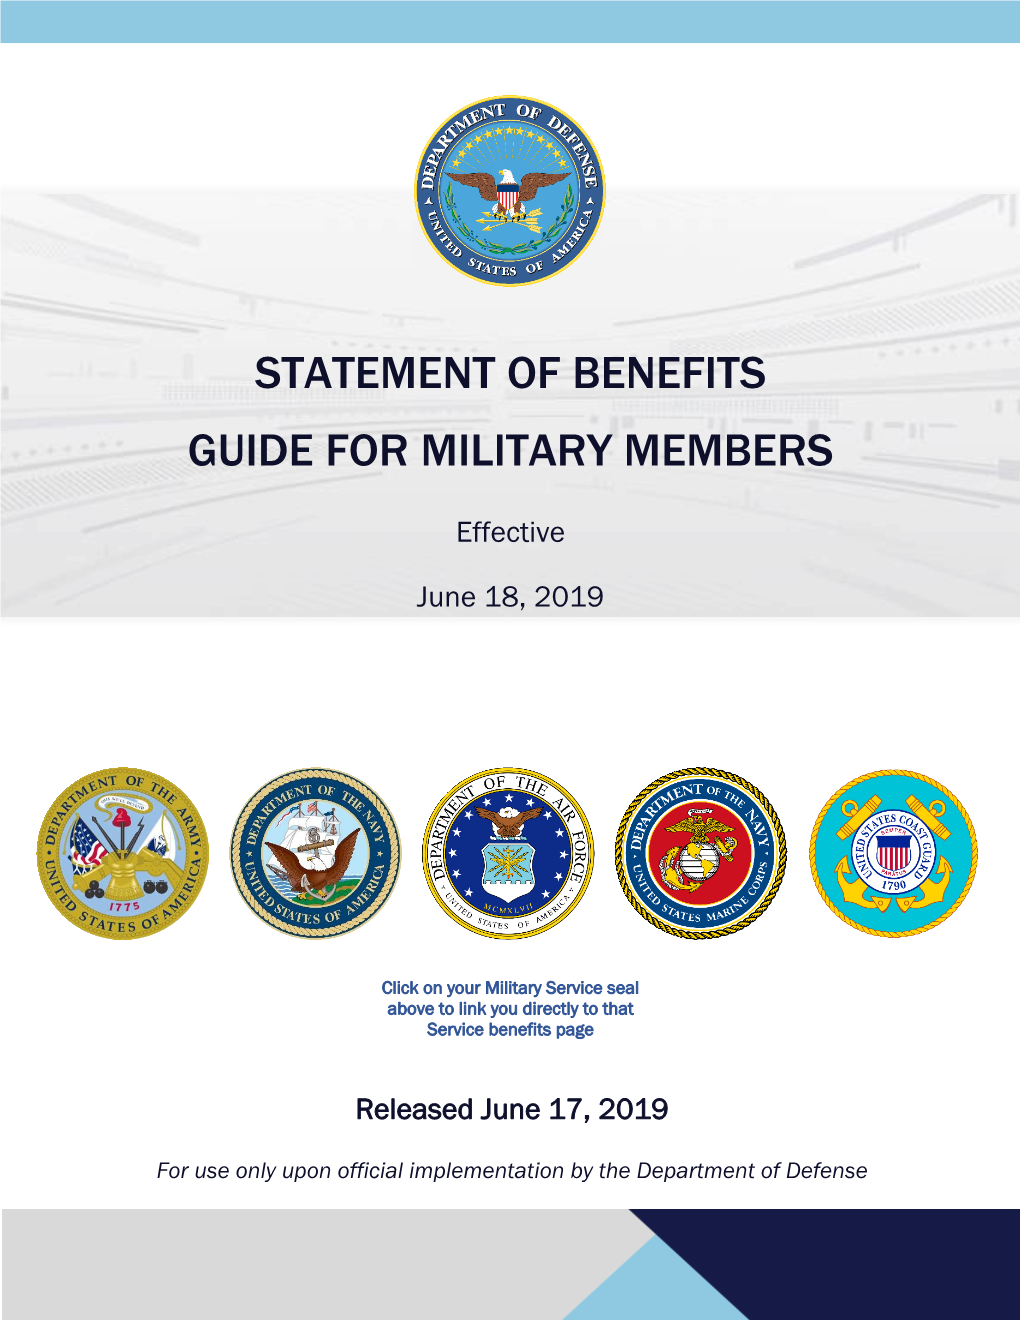 Statement of Benefits Guide for Military Members